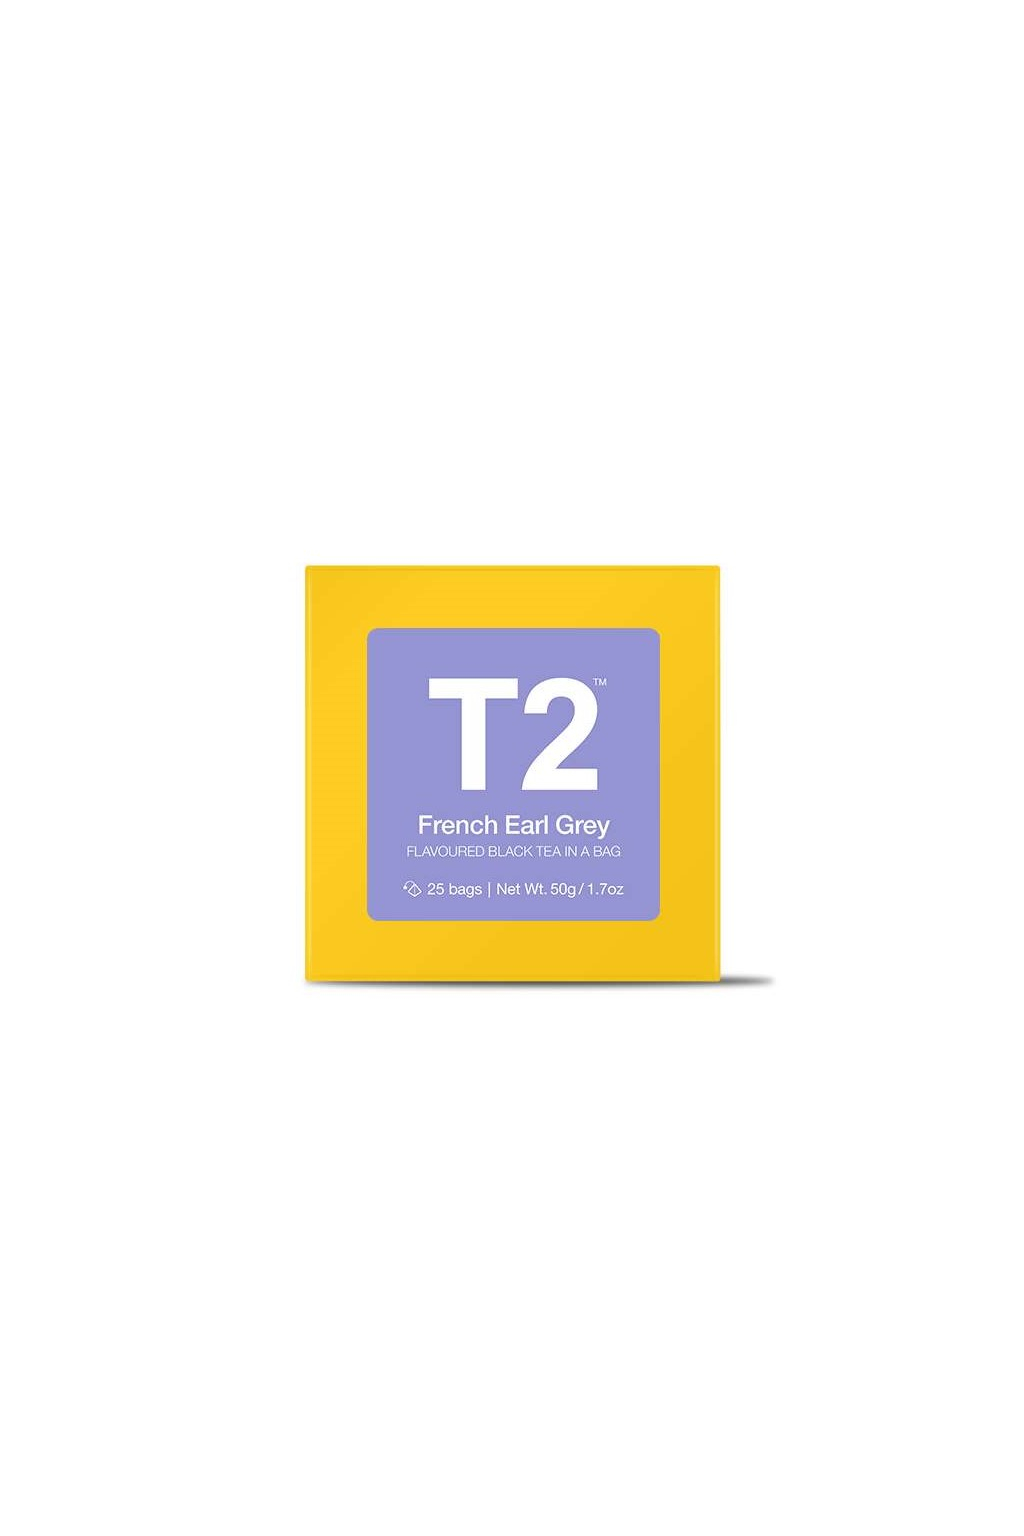 t2 French Earl Grey Digitized Packaging hi res (2)